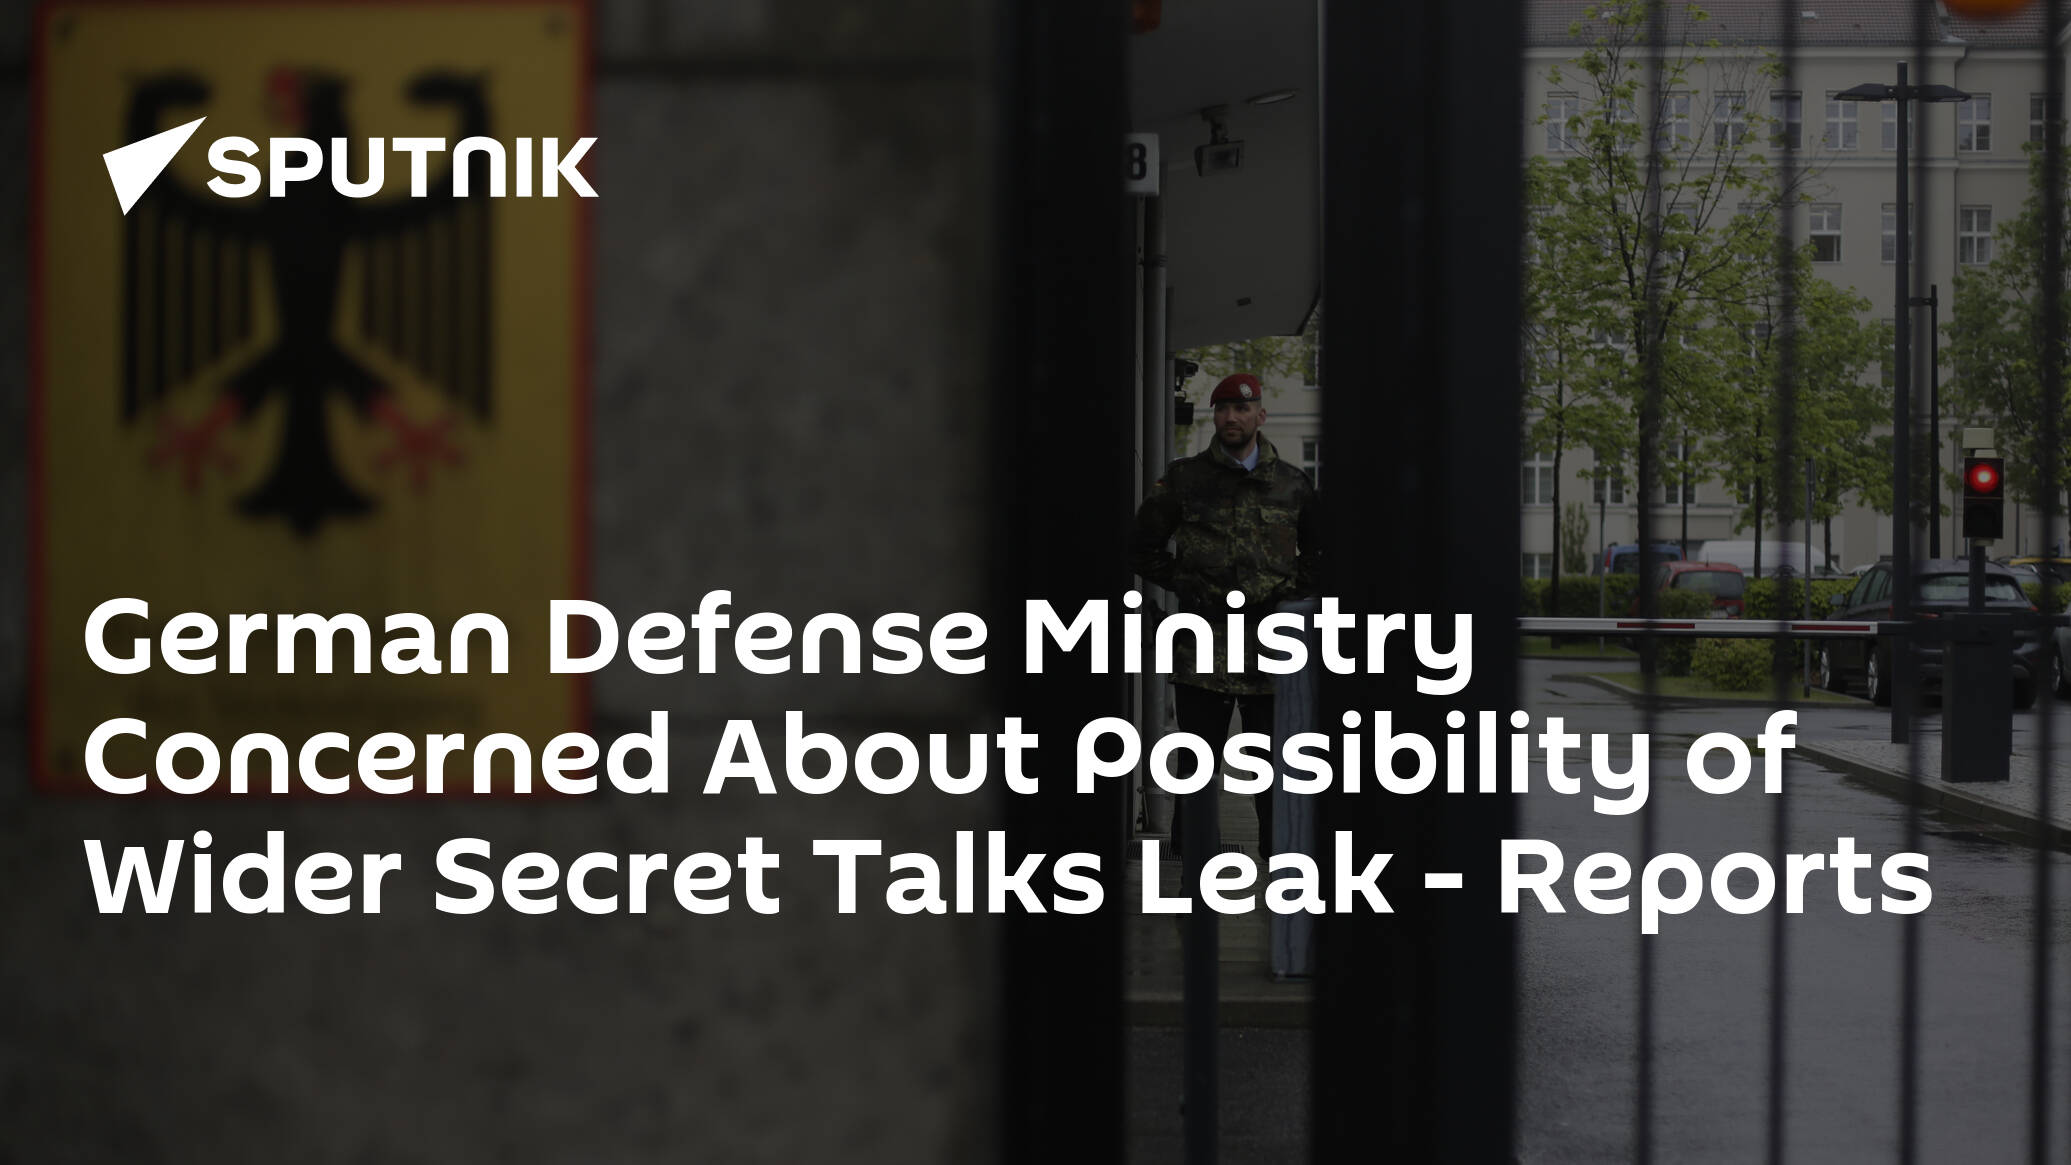 German Defense Ministry Concerned About Possibility of Wider Secret Talks Leak – Reports